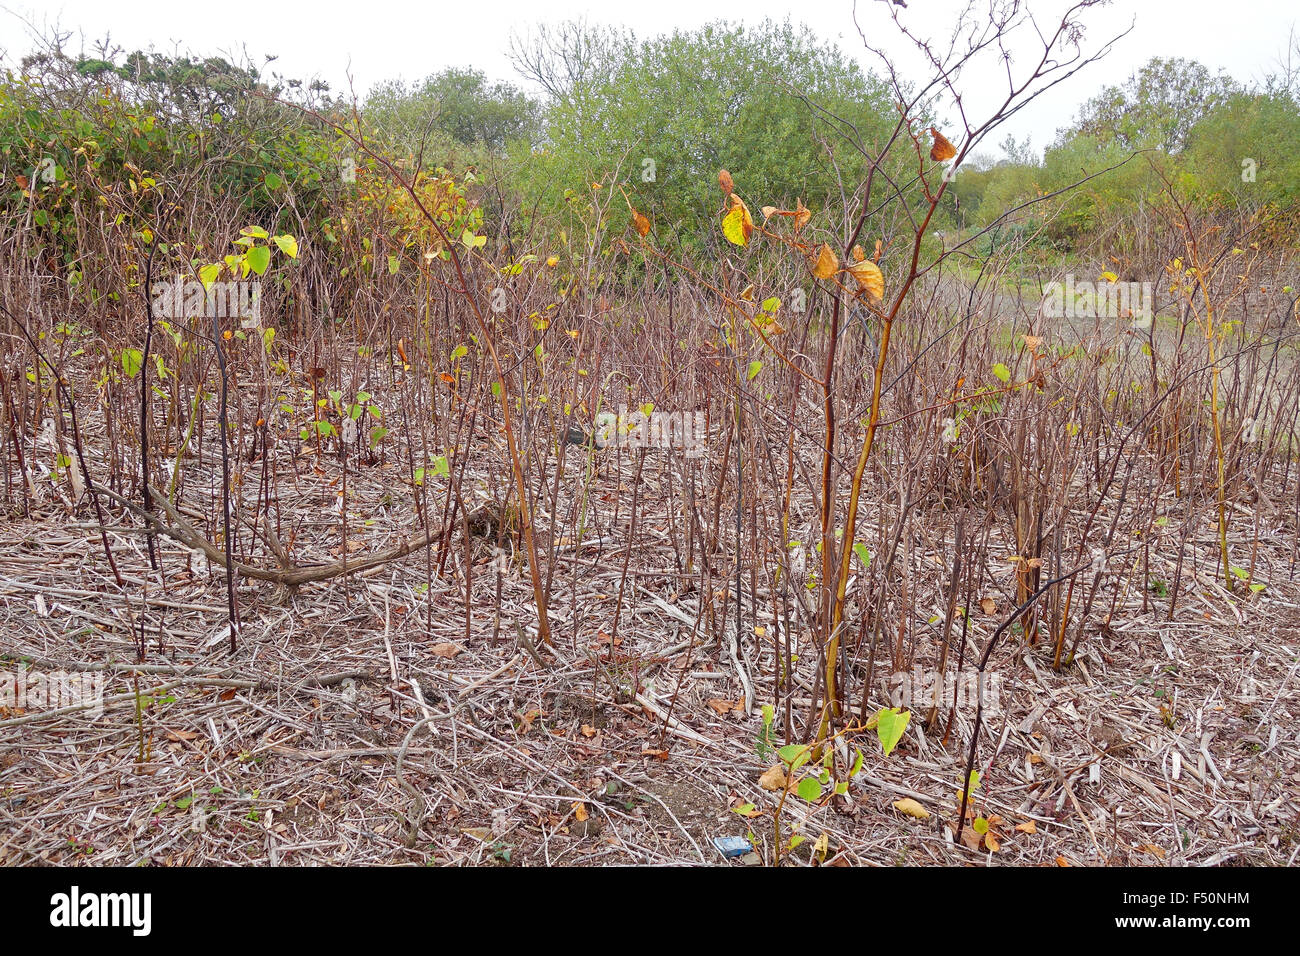 Japanese Knotweed that has been treated to eradicate this invasive plant Stock Photo